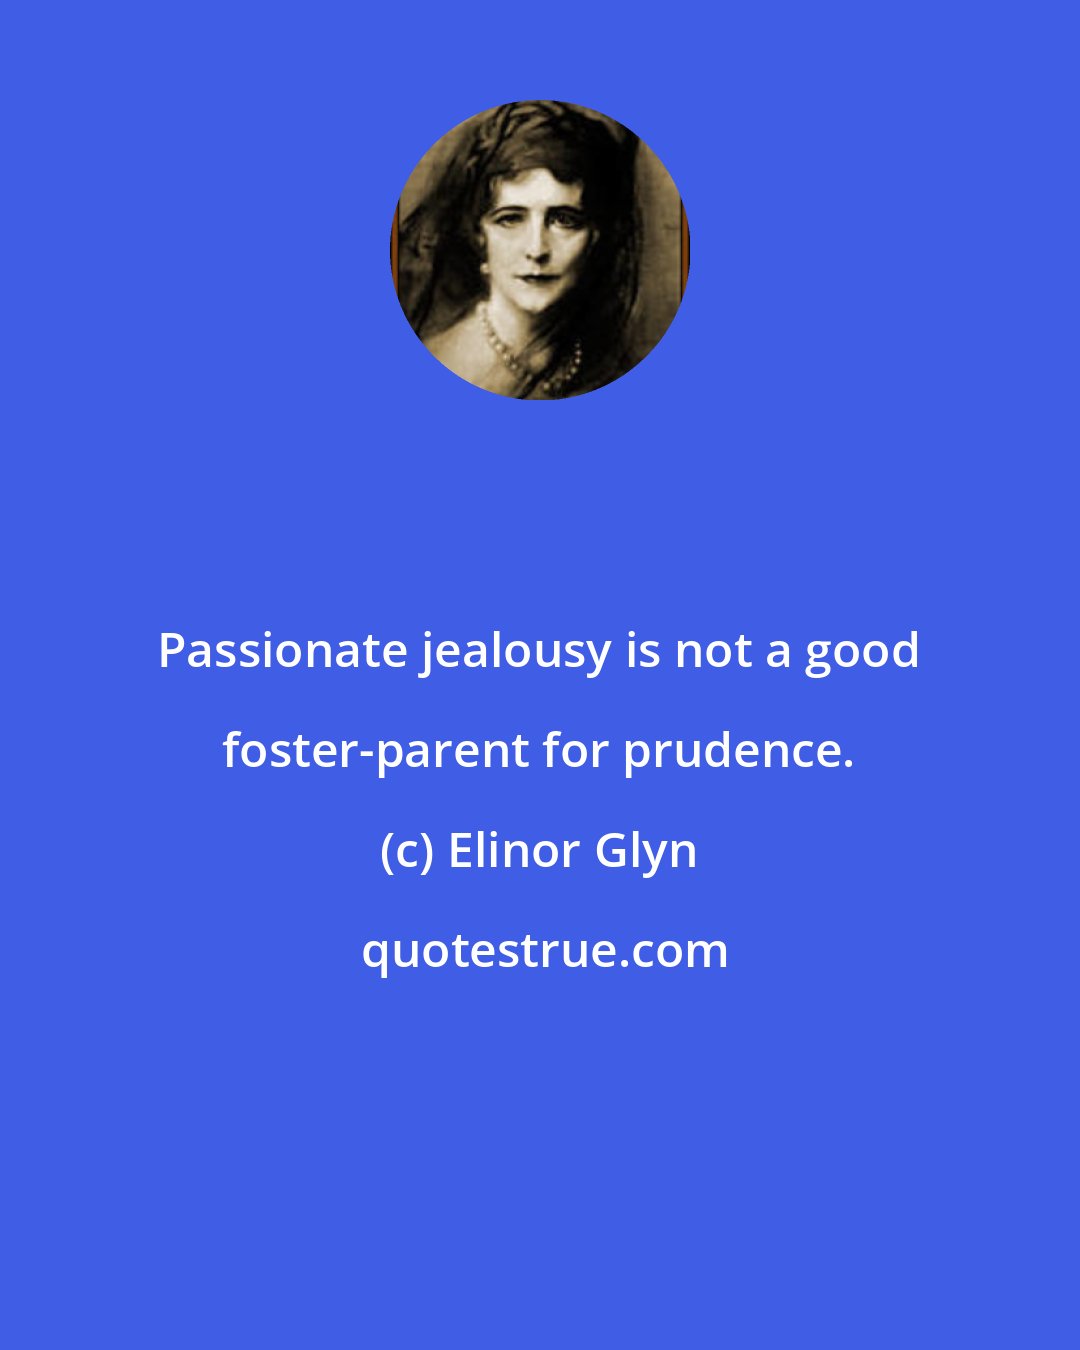 Elinor Glyn: Passionate jealousy is not a good foster-parent for prudence.